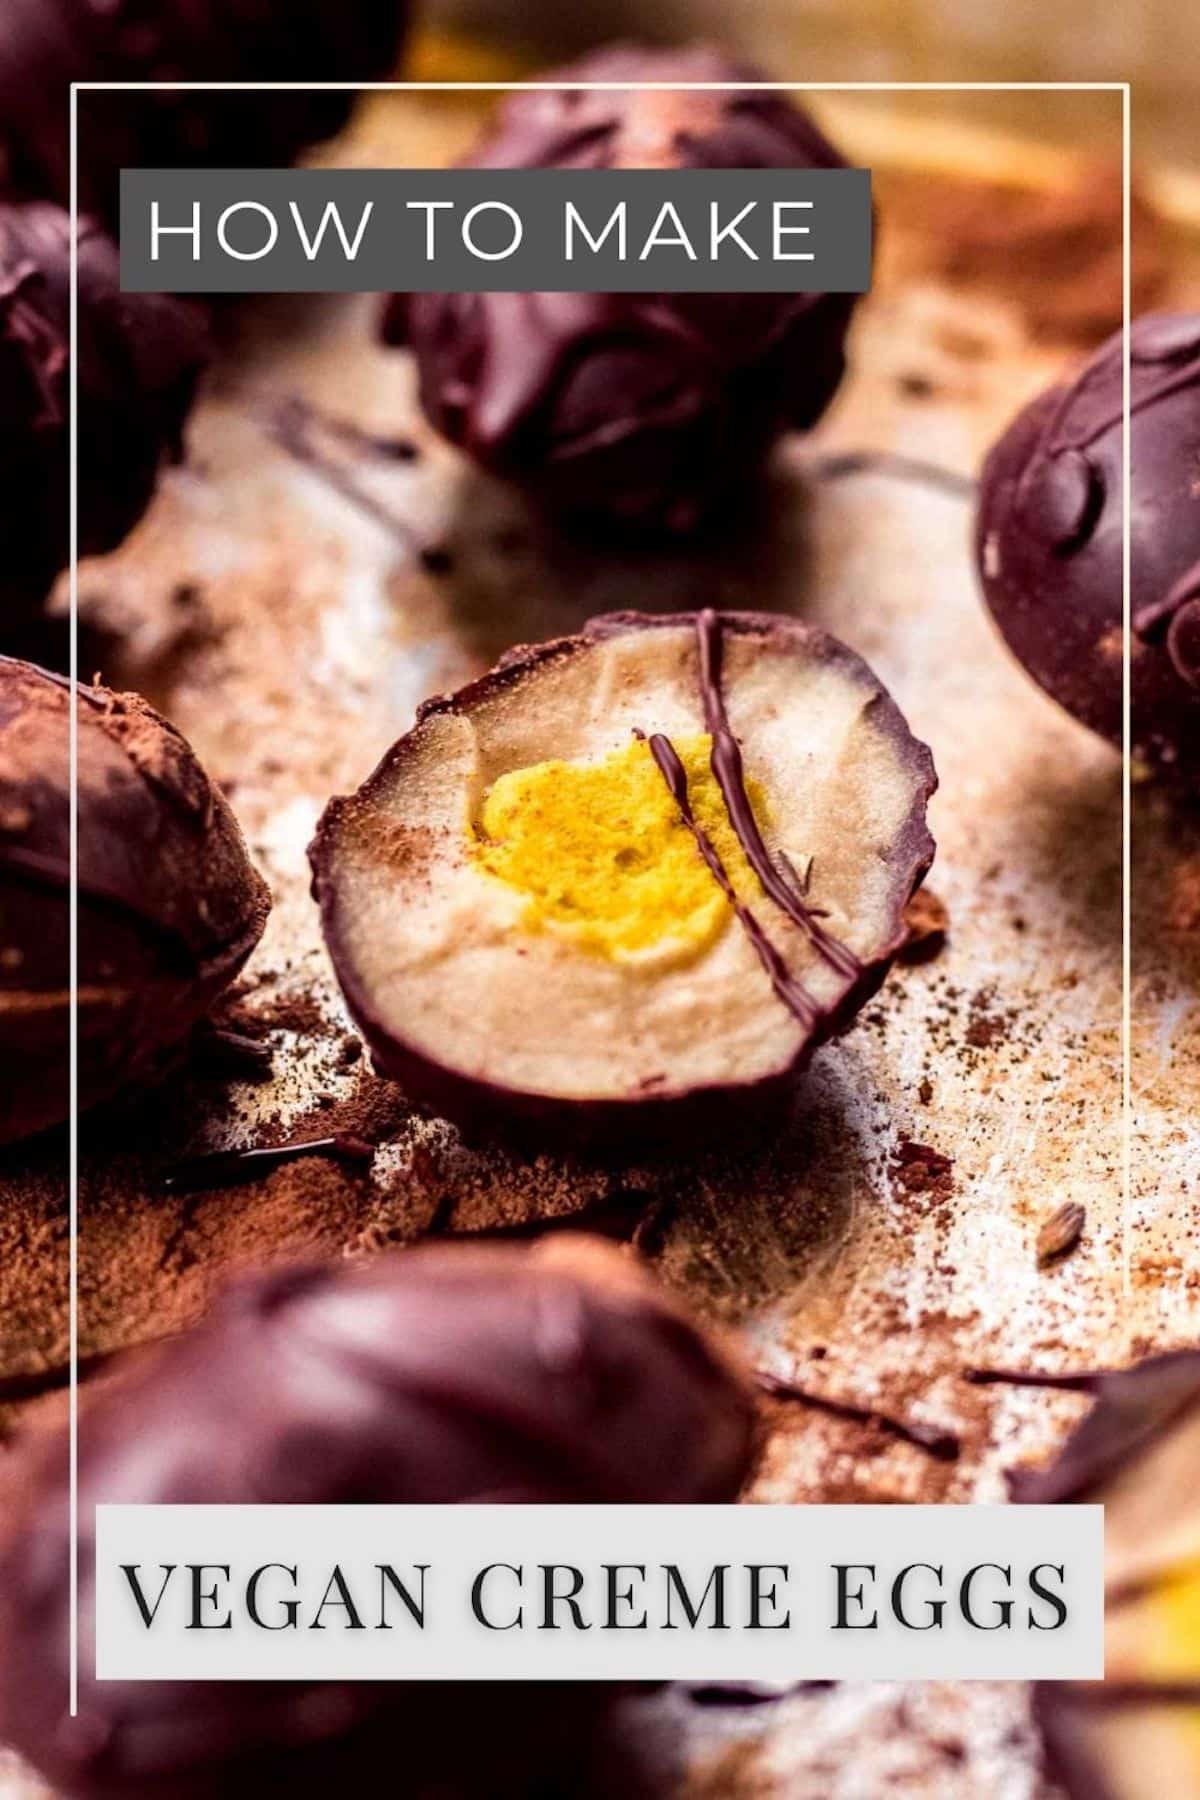 Made with 5 healthy ingredients, these vegan creme eggs are a great alternative to Cadbury eggs. They're refined sugar free and the perfect vegan dessert for Easter. 